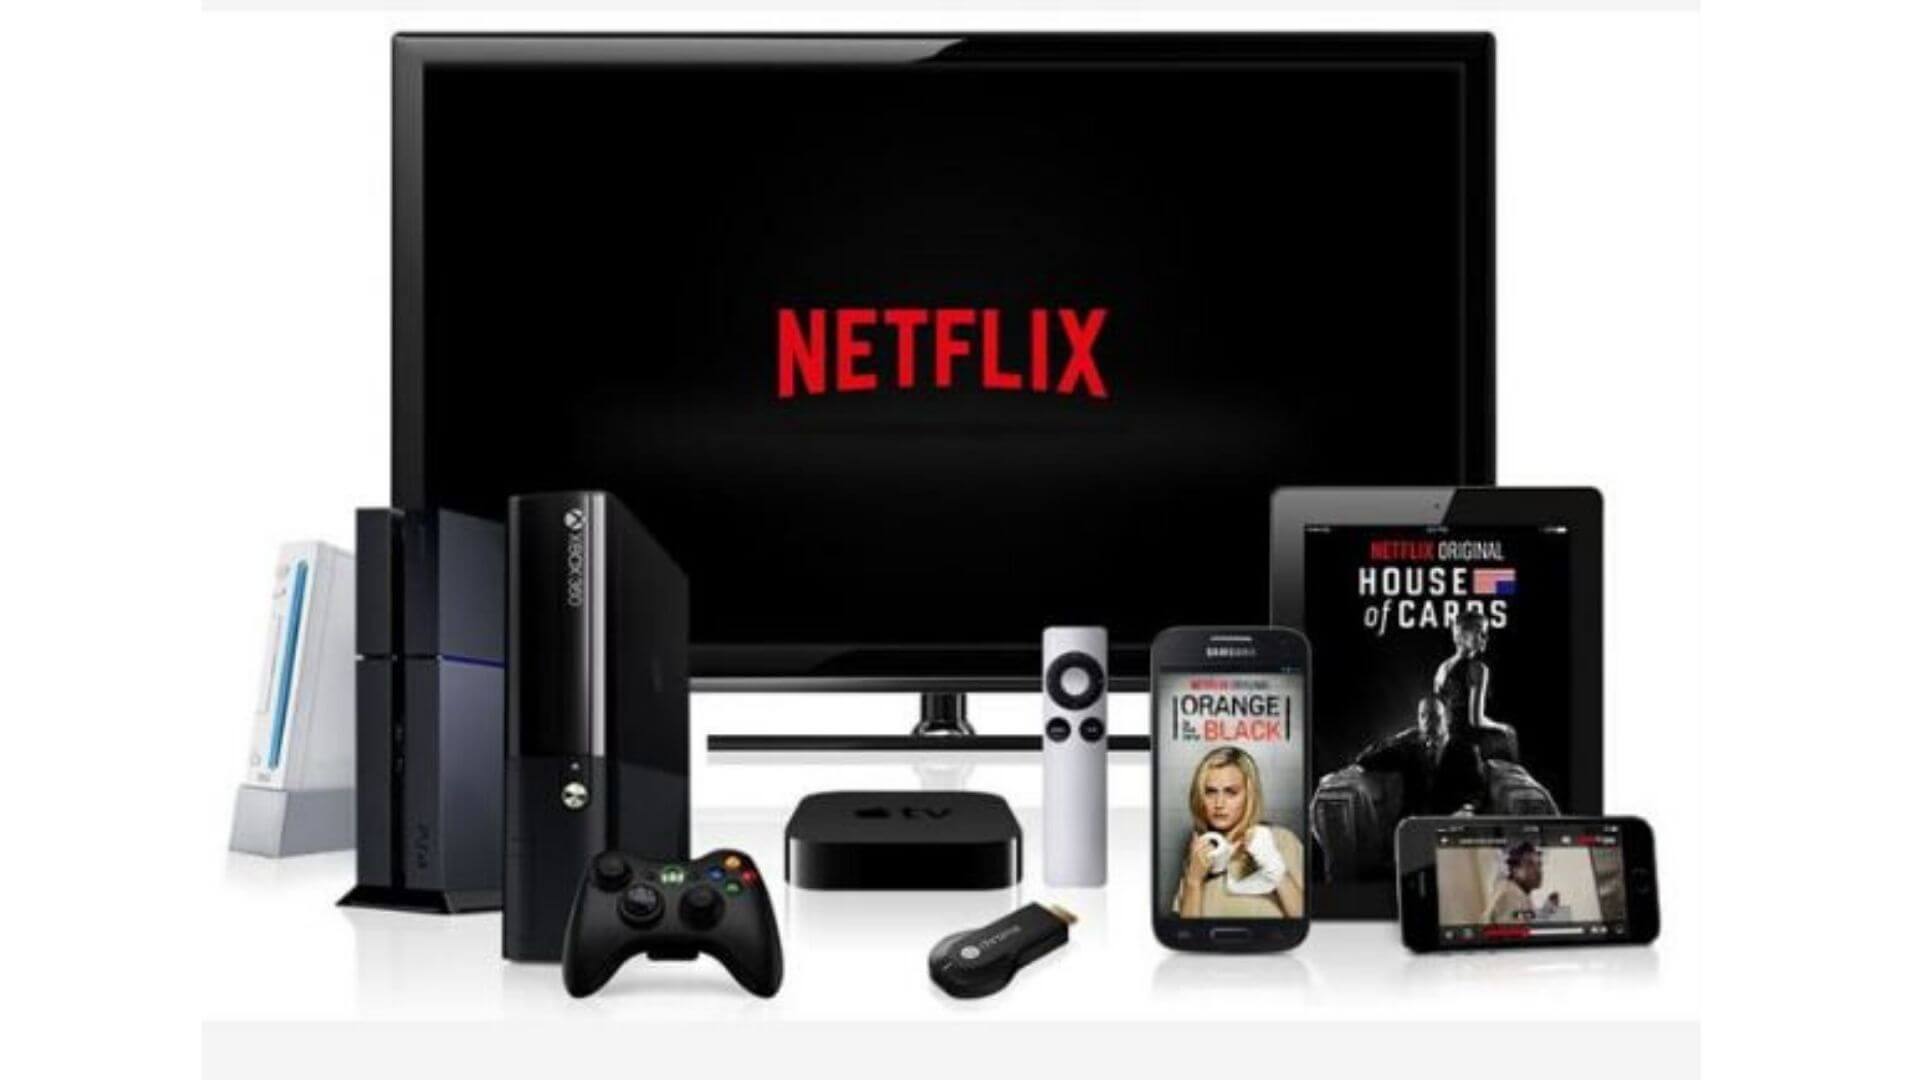 Netflix supported devices